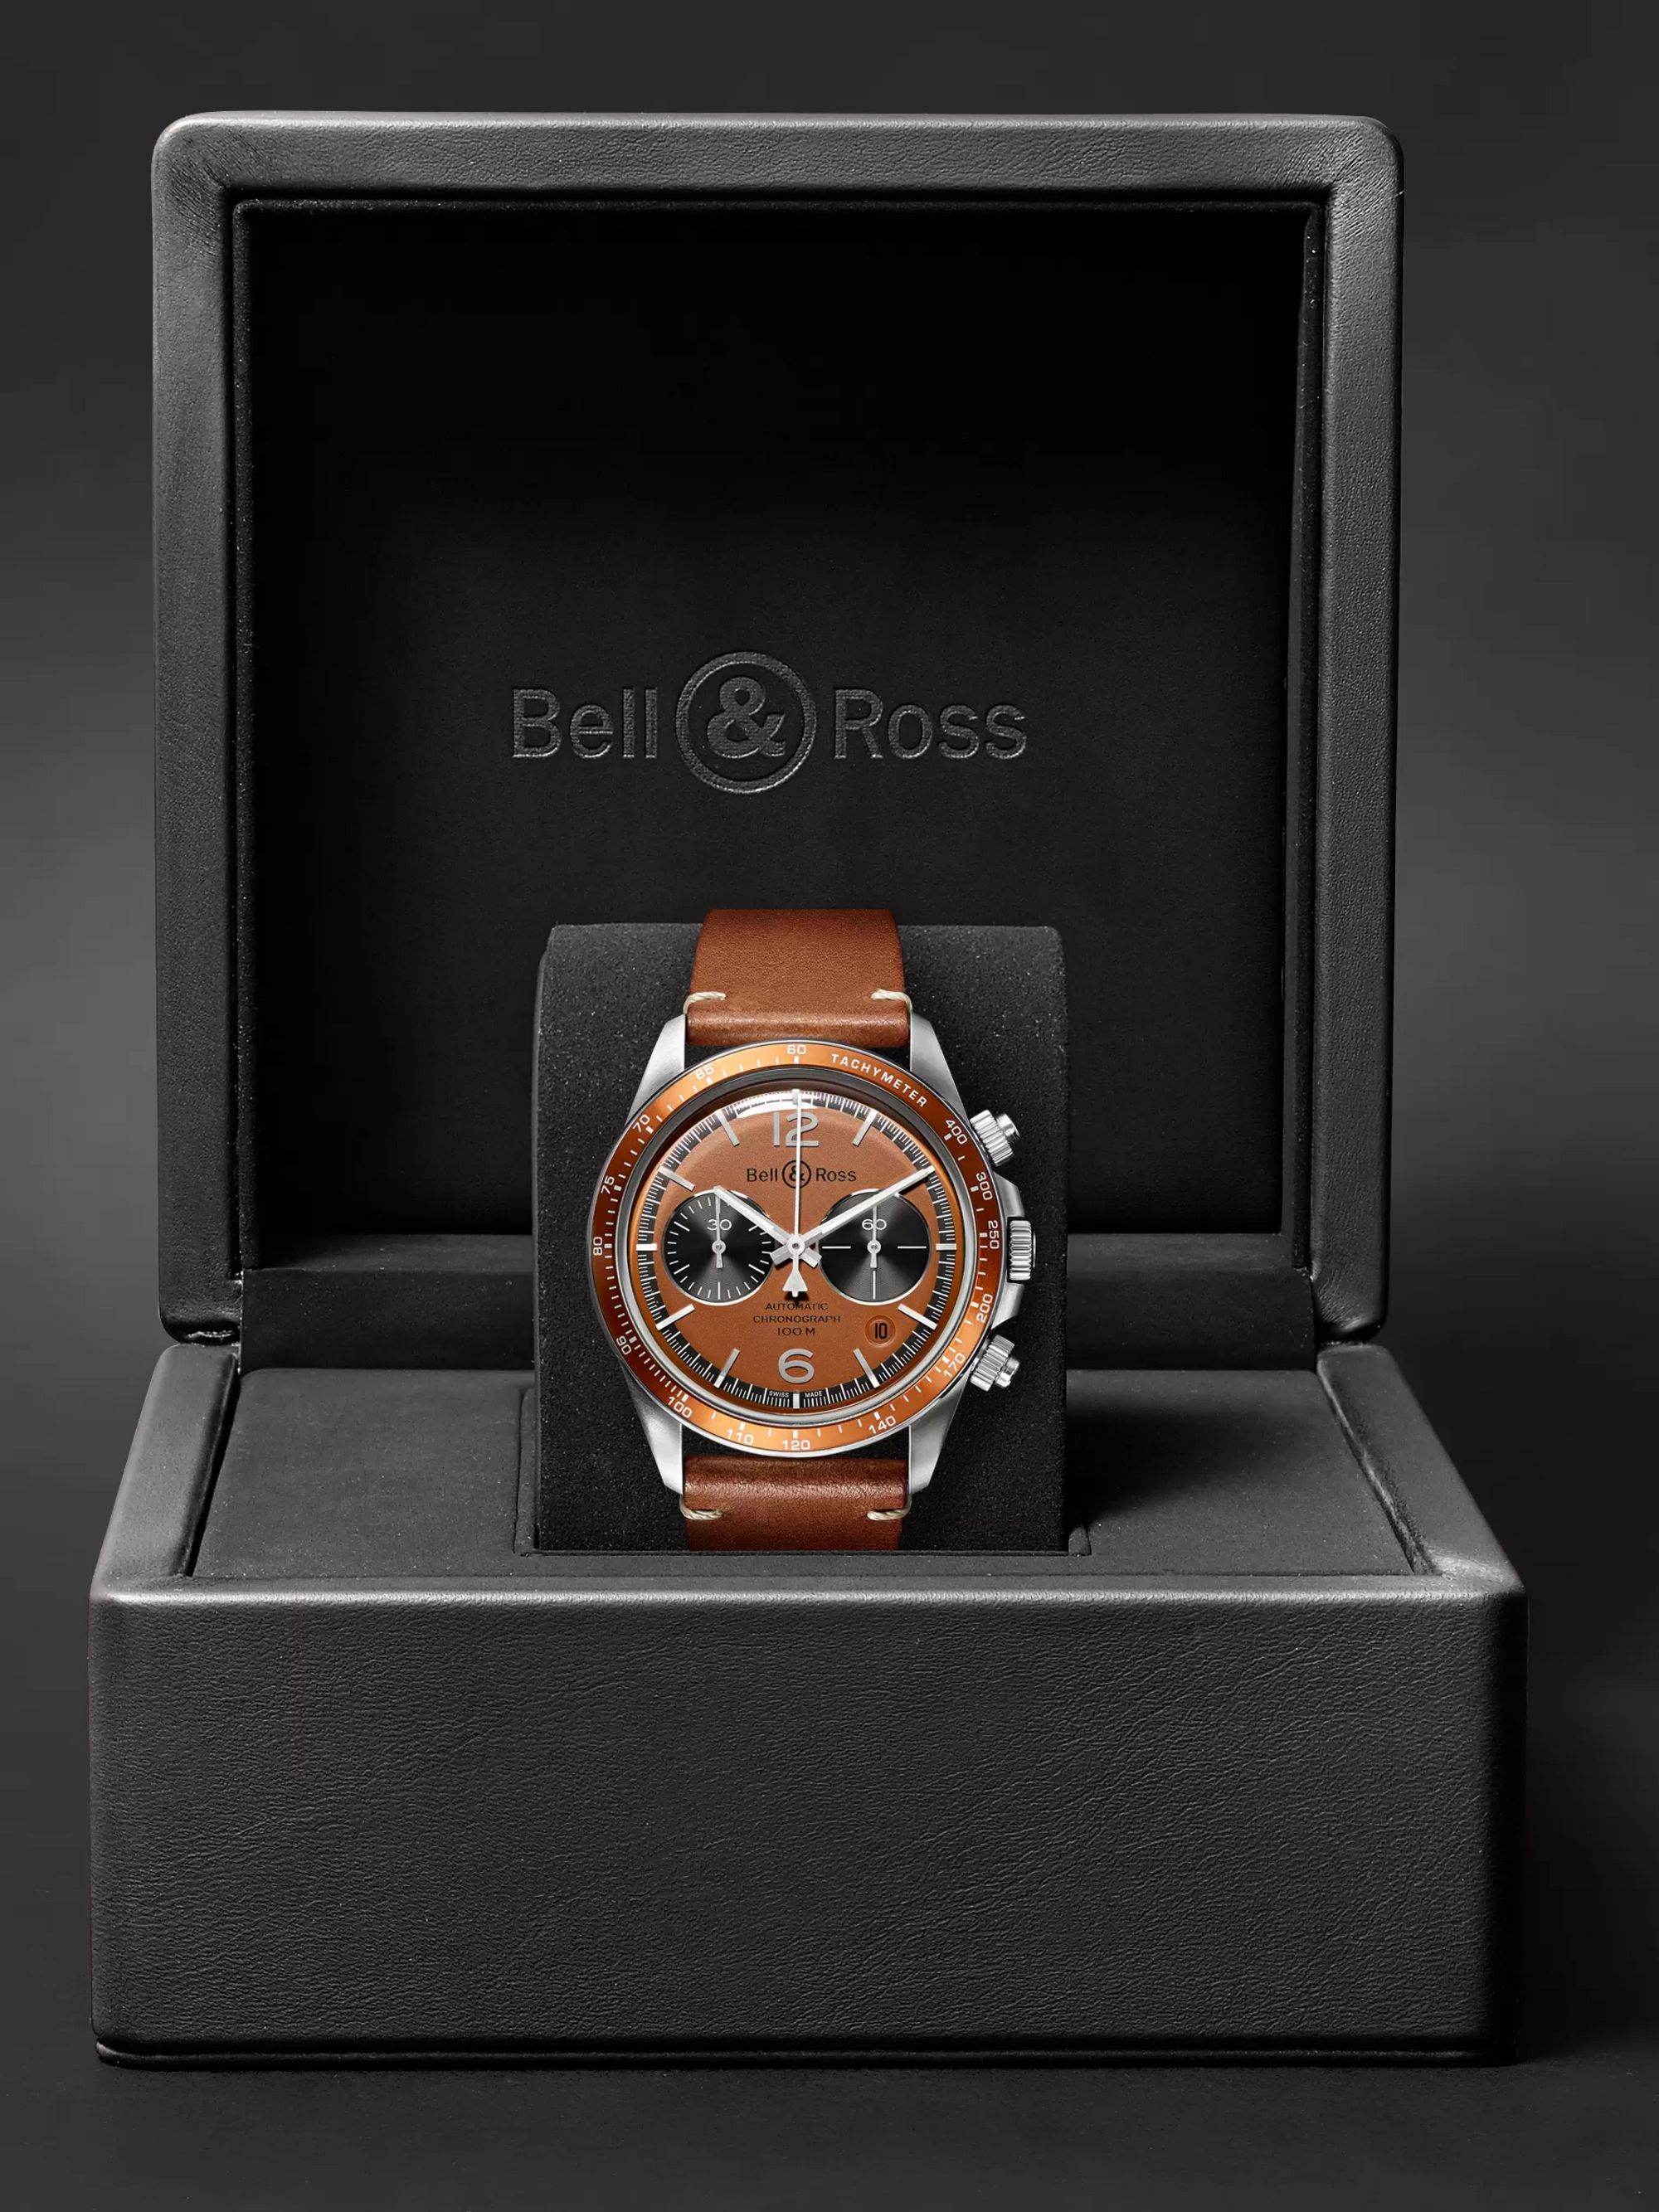 BELL & ROSS + Revolution Bellytanker Dusty Limited Edition Automatic Chronograph 41mm Steel and Leather Watch, Ref. No. BRV294-RR-ST/SCA